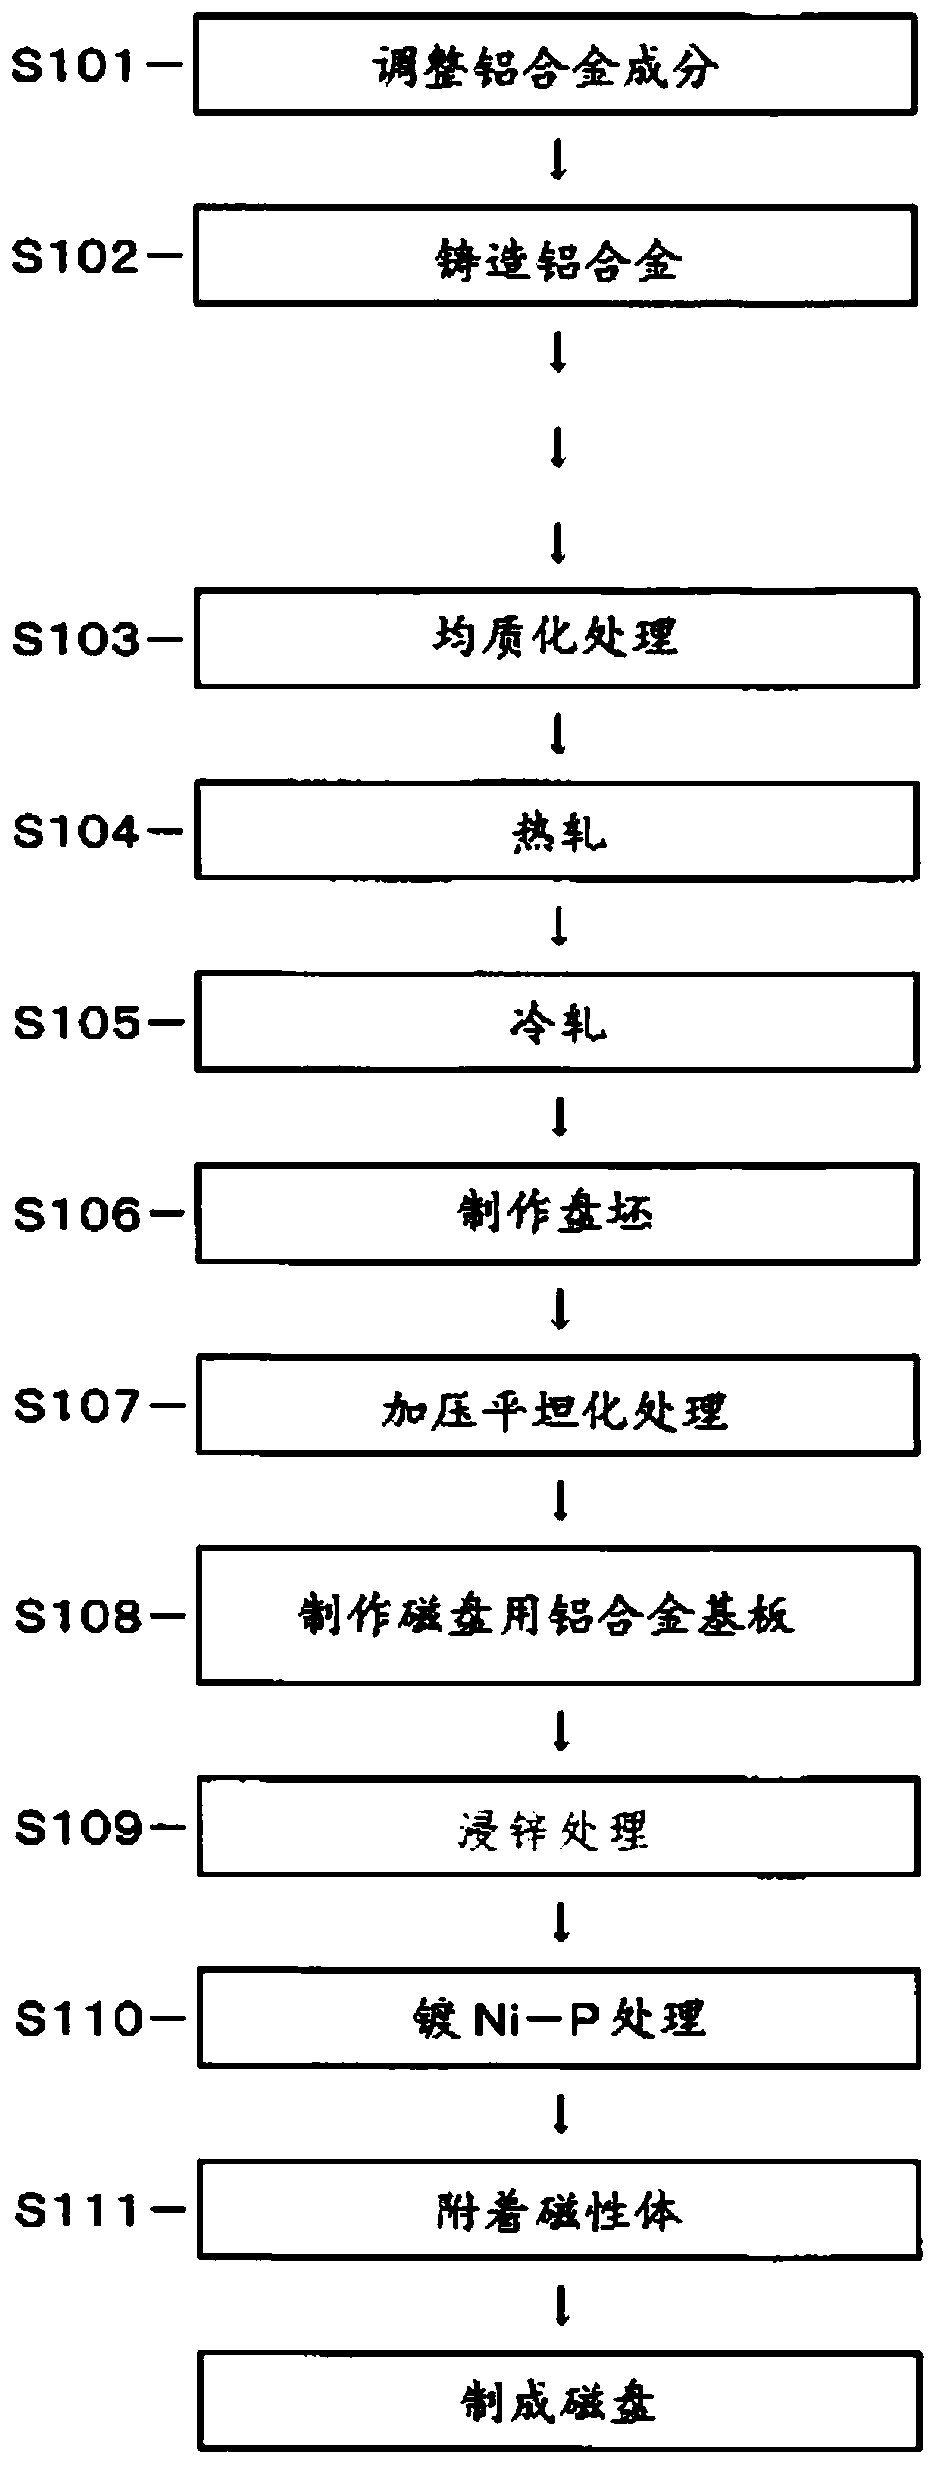 Aluminum alloy substrate for magnetic disks, method for producing same, and magnetic disk using aluminum alloy substrate for magnetic disks